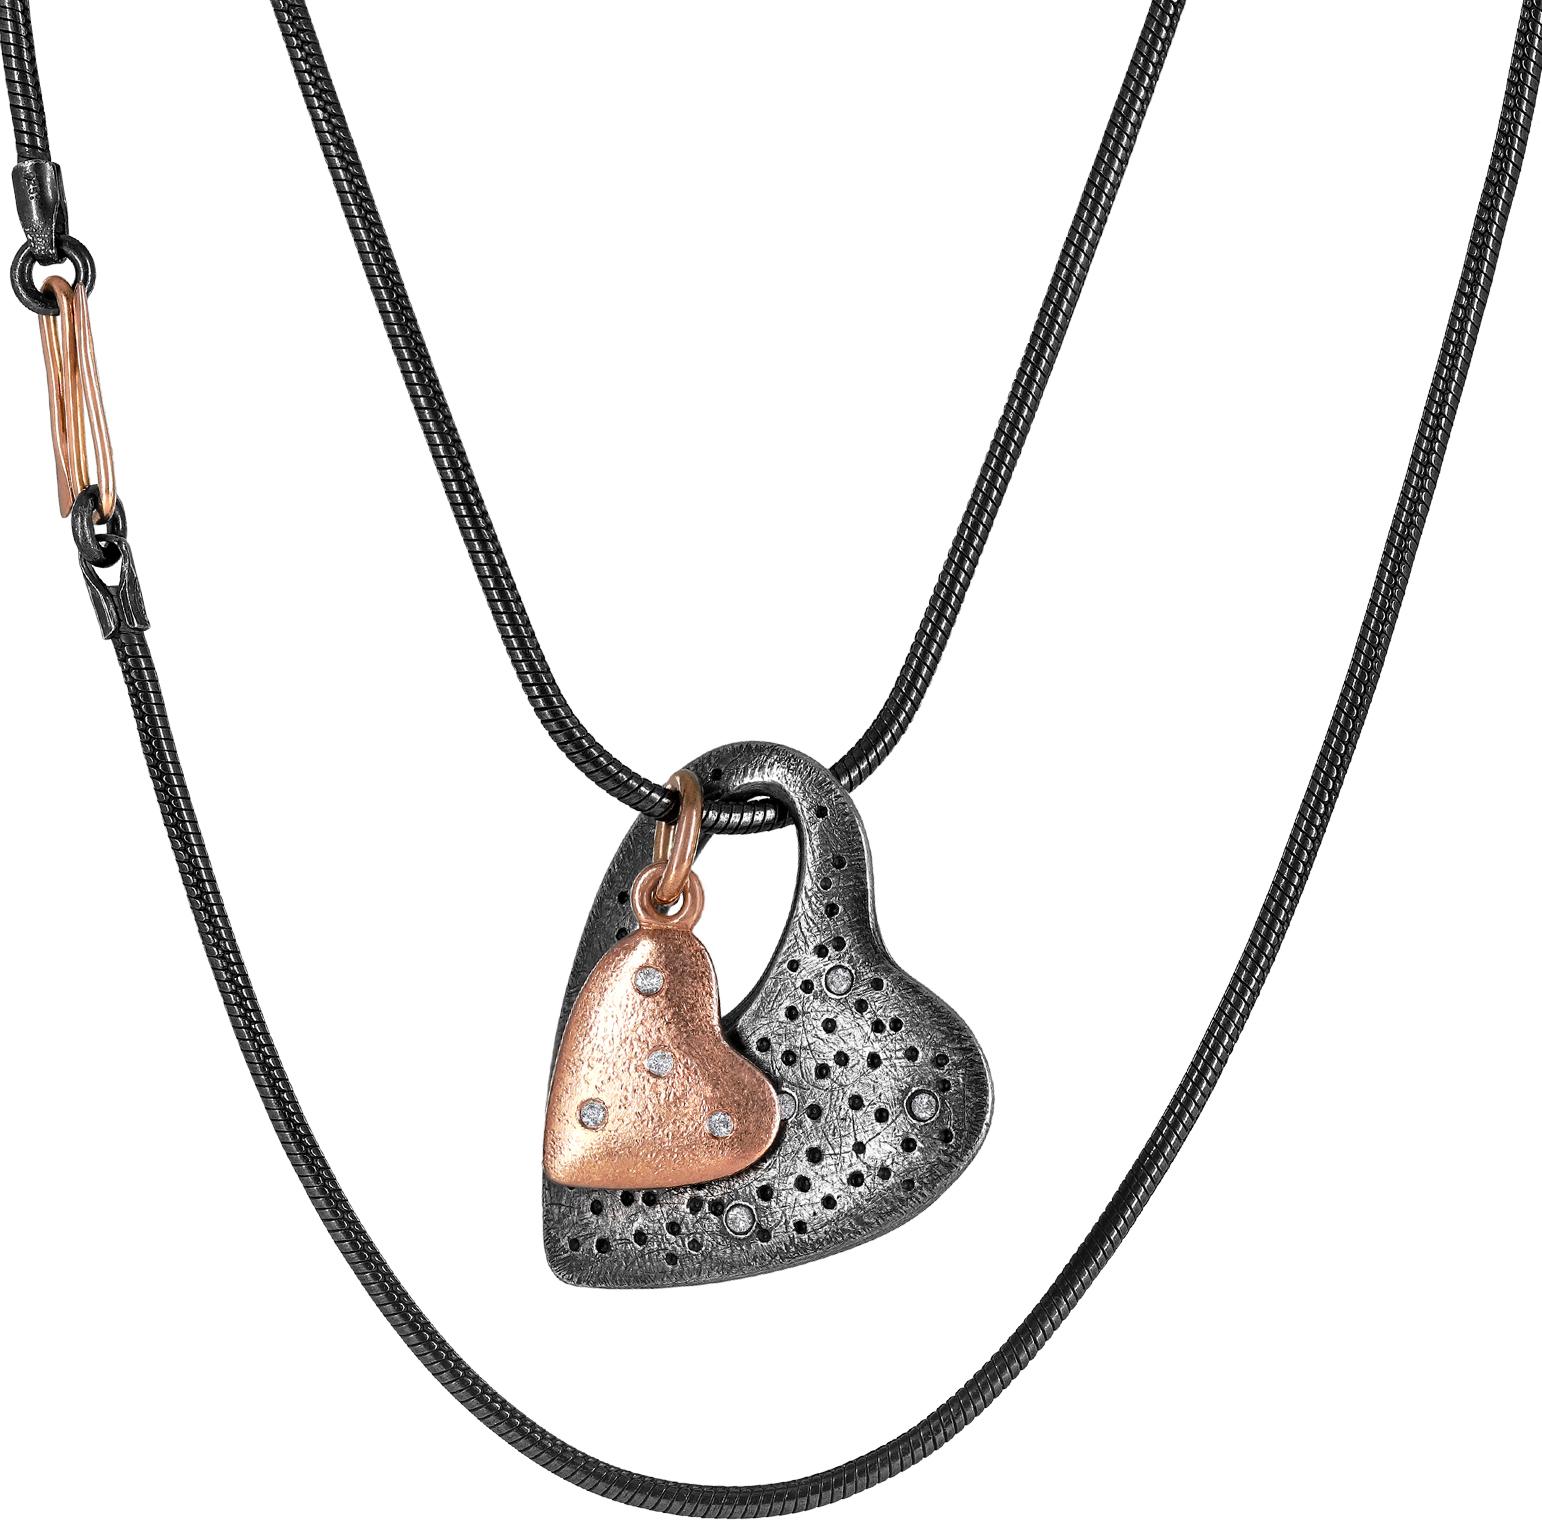 Double Diamond Dust Heart Long Pendant Necklace hand-fabricated by renowned jewelry maker Pedro Boregaard featuring an 18k rose gold heart and an oxidized sterling silver heart, each embedded with round brilliant-cut white diamonds on both side (18